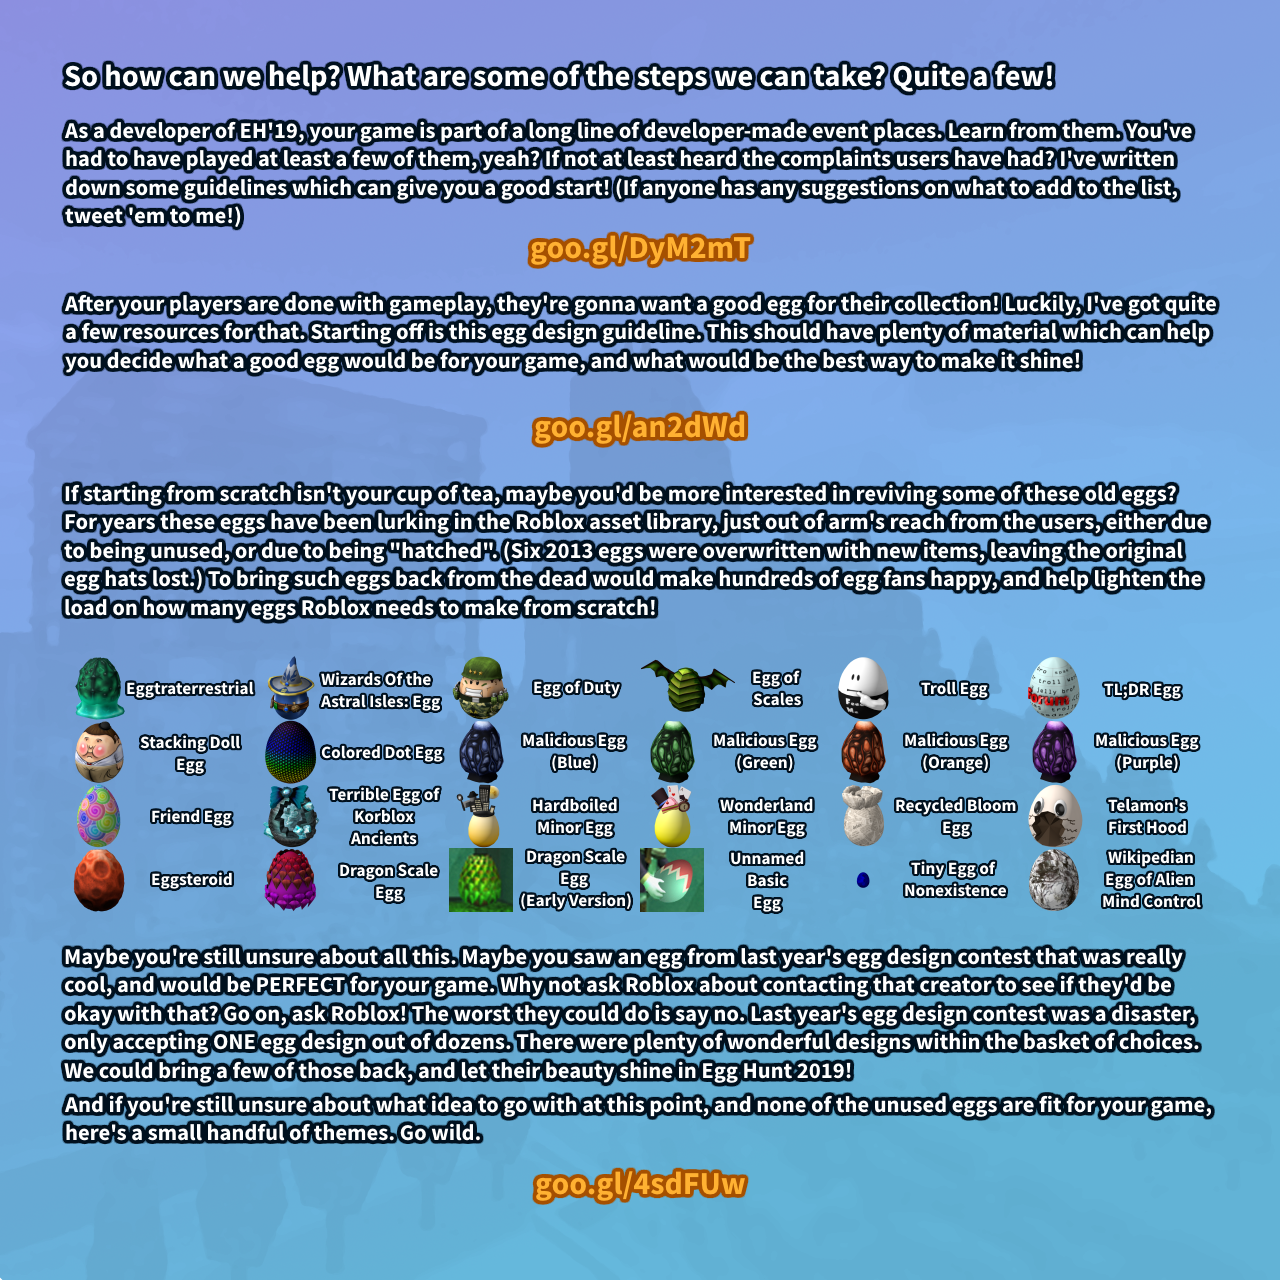 Ivy On Twitter My Thoughts On Egghunt2019 And How The Roblox Community Can Reach For The Stars - roblox eggsteroid